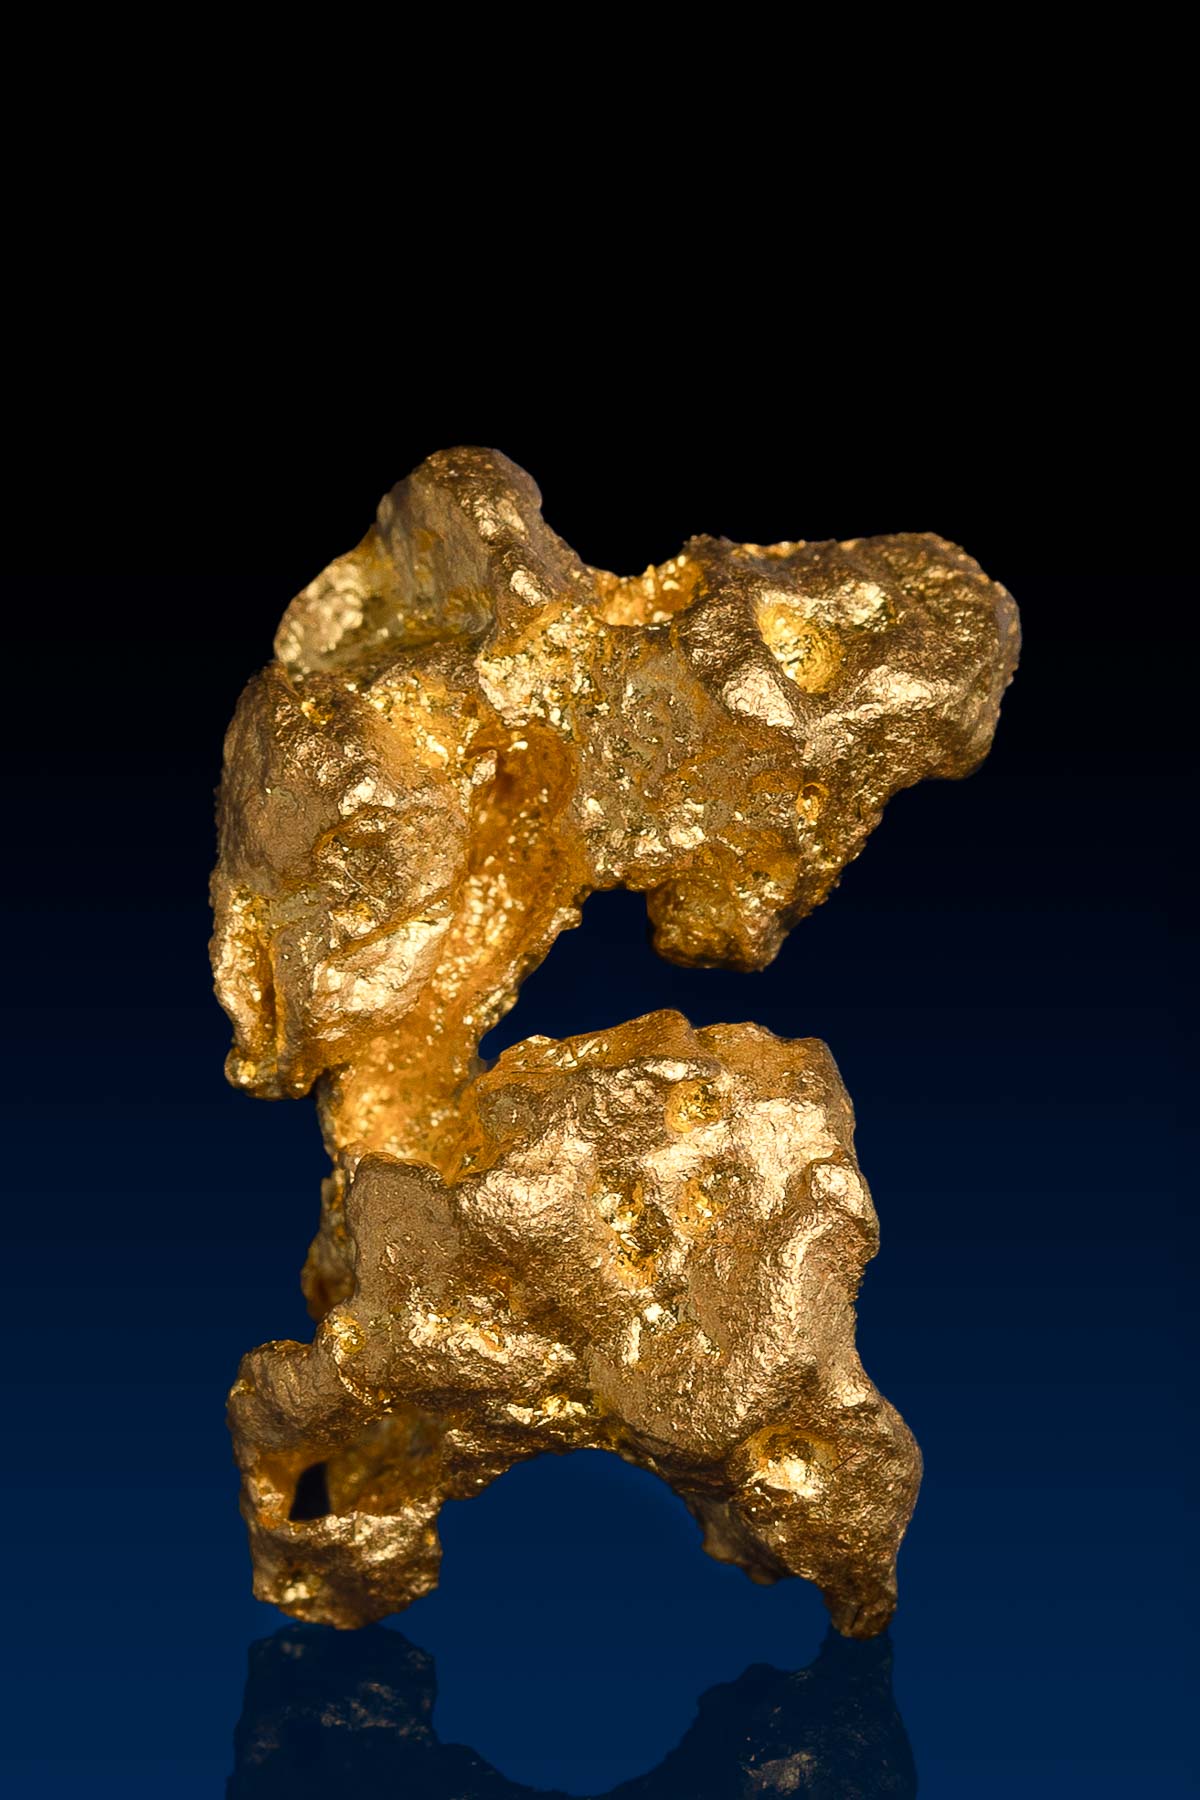 Exceptional Australian Natural Gold Nugget - 9.05 grams